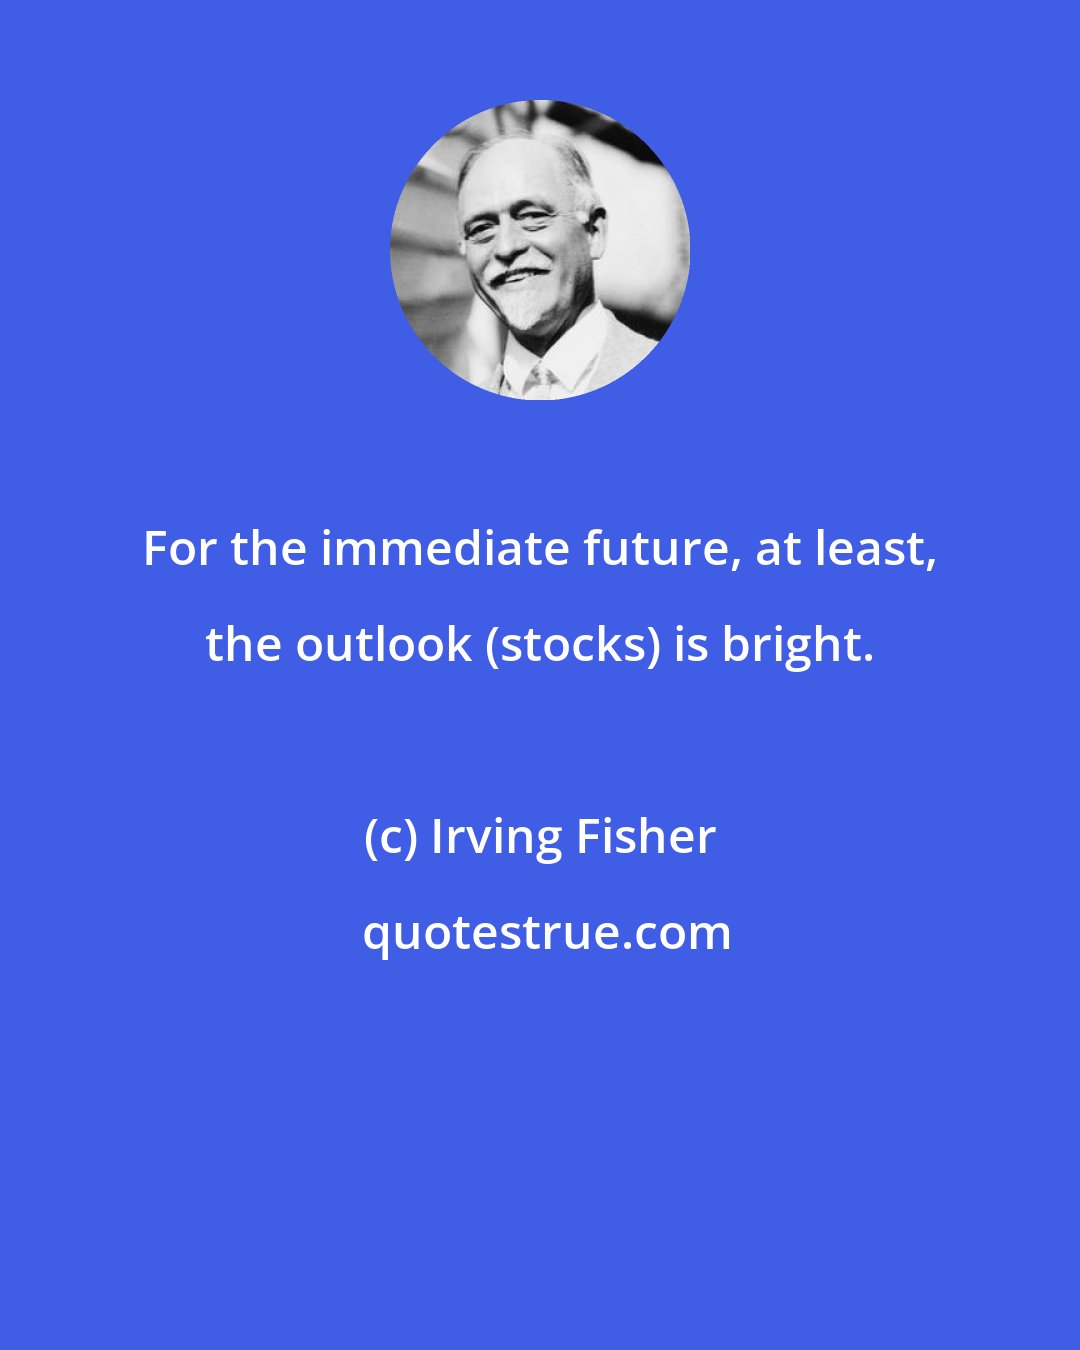 Irving Fisher: For the immediate future, at least, the outlook (stocks) is bright.